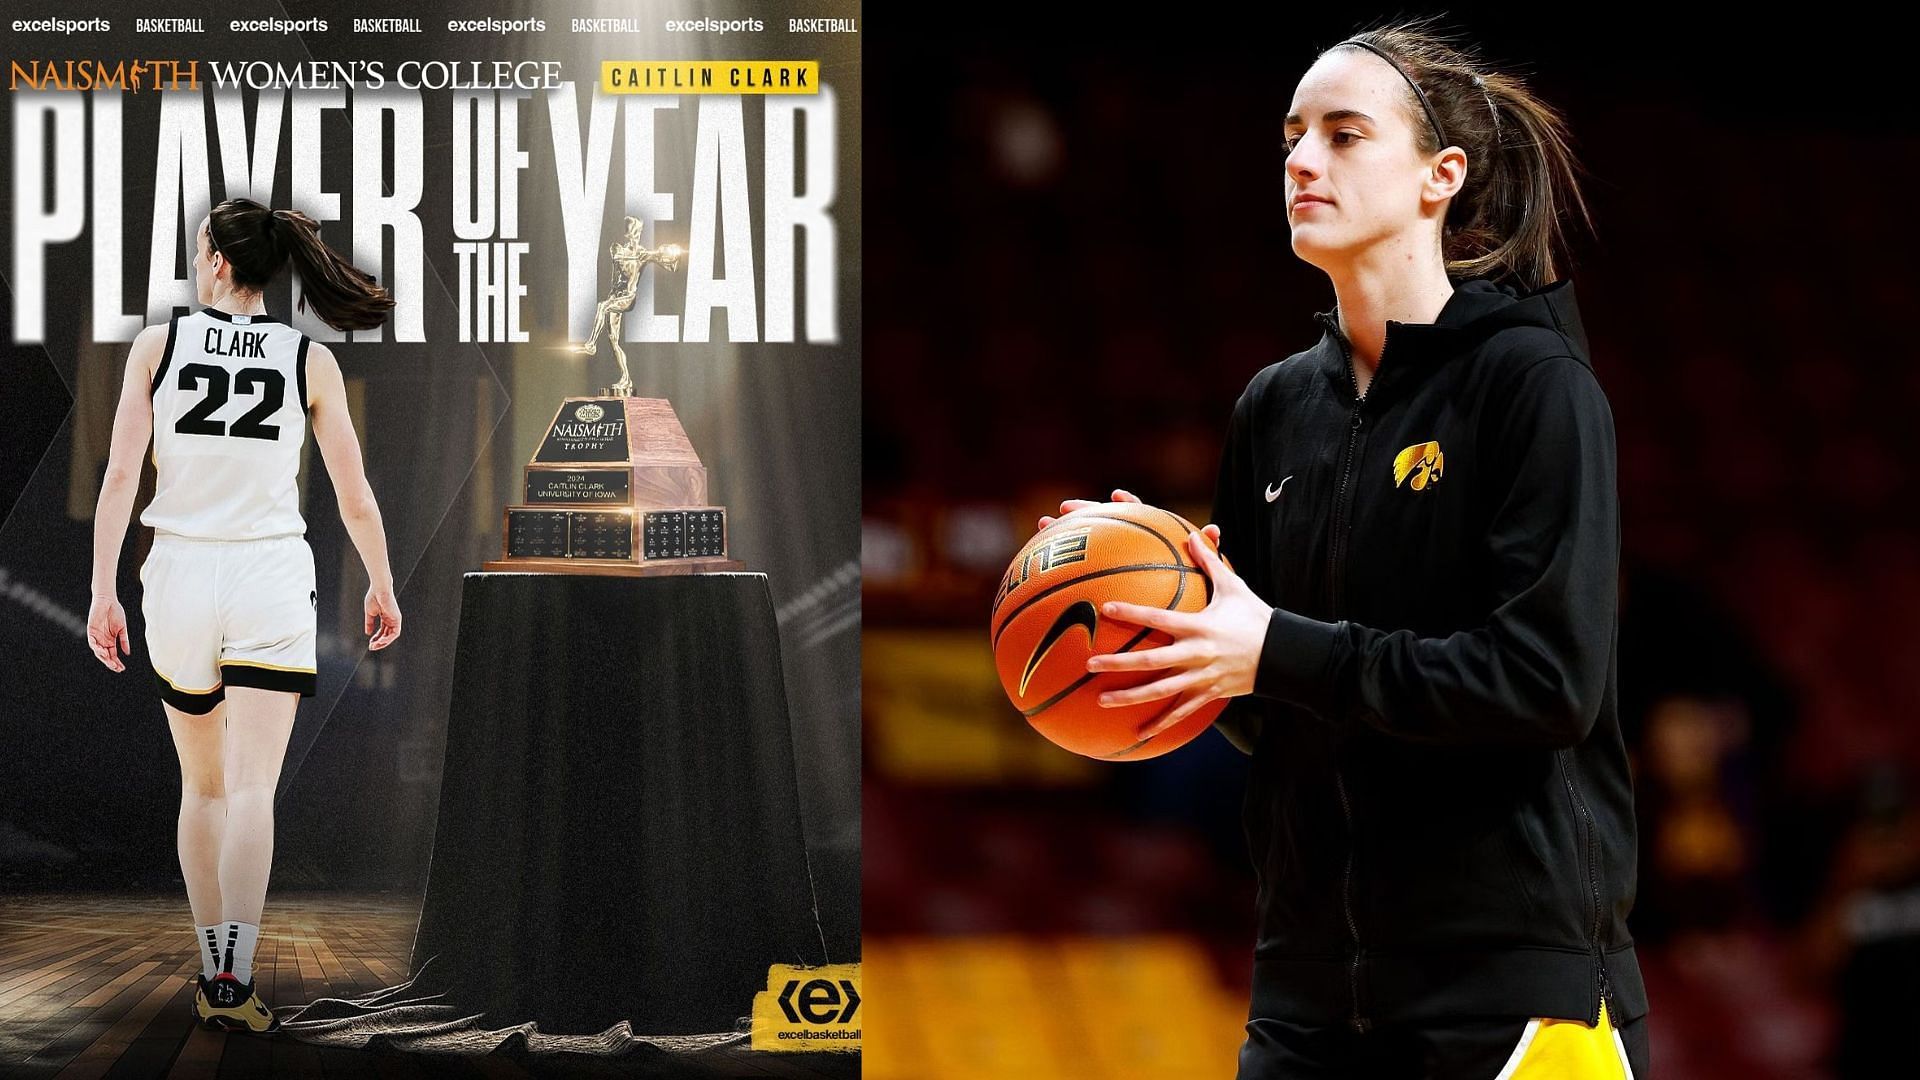 Caitlin Clark is the Naismith Player of the Year